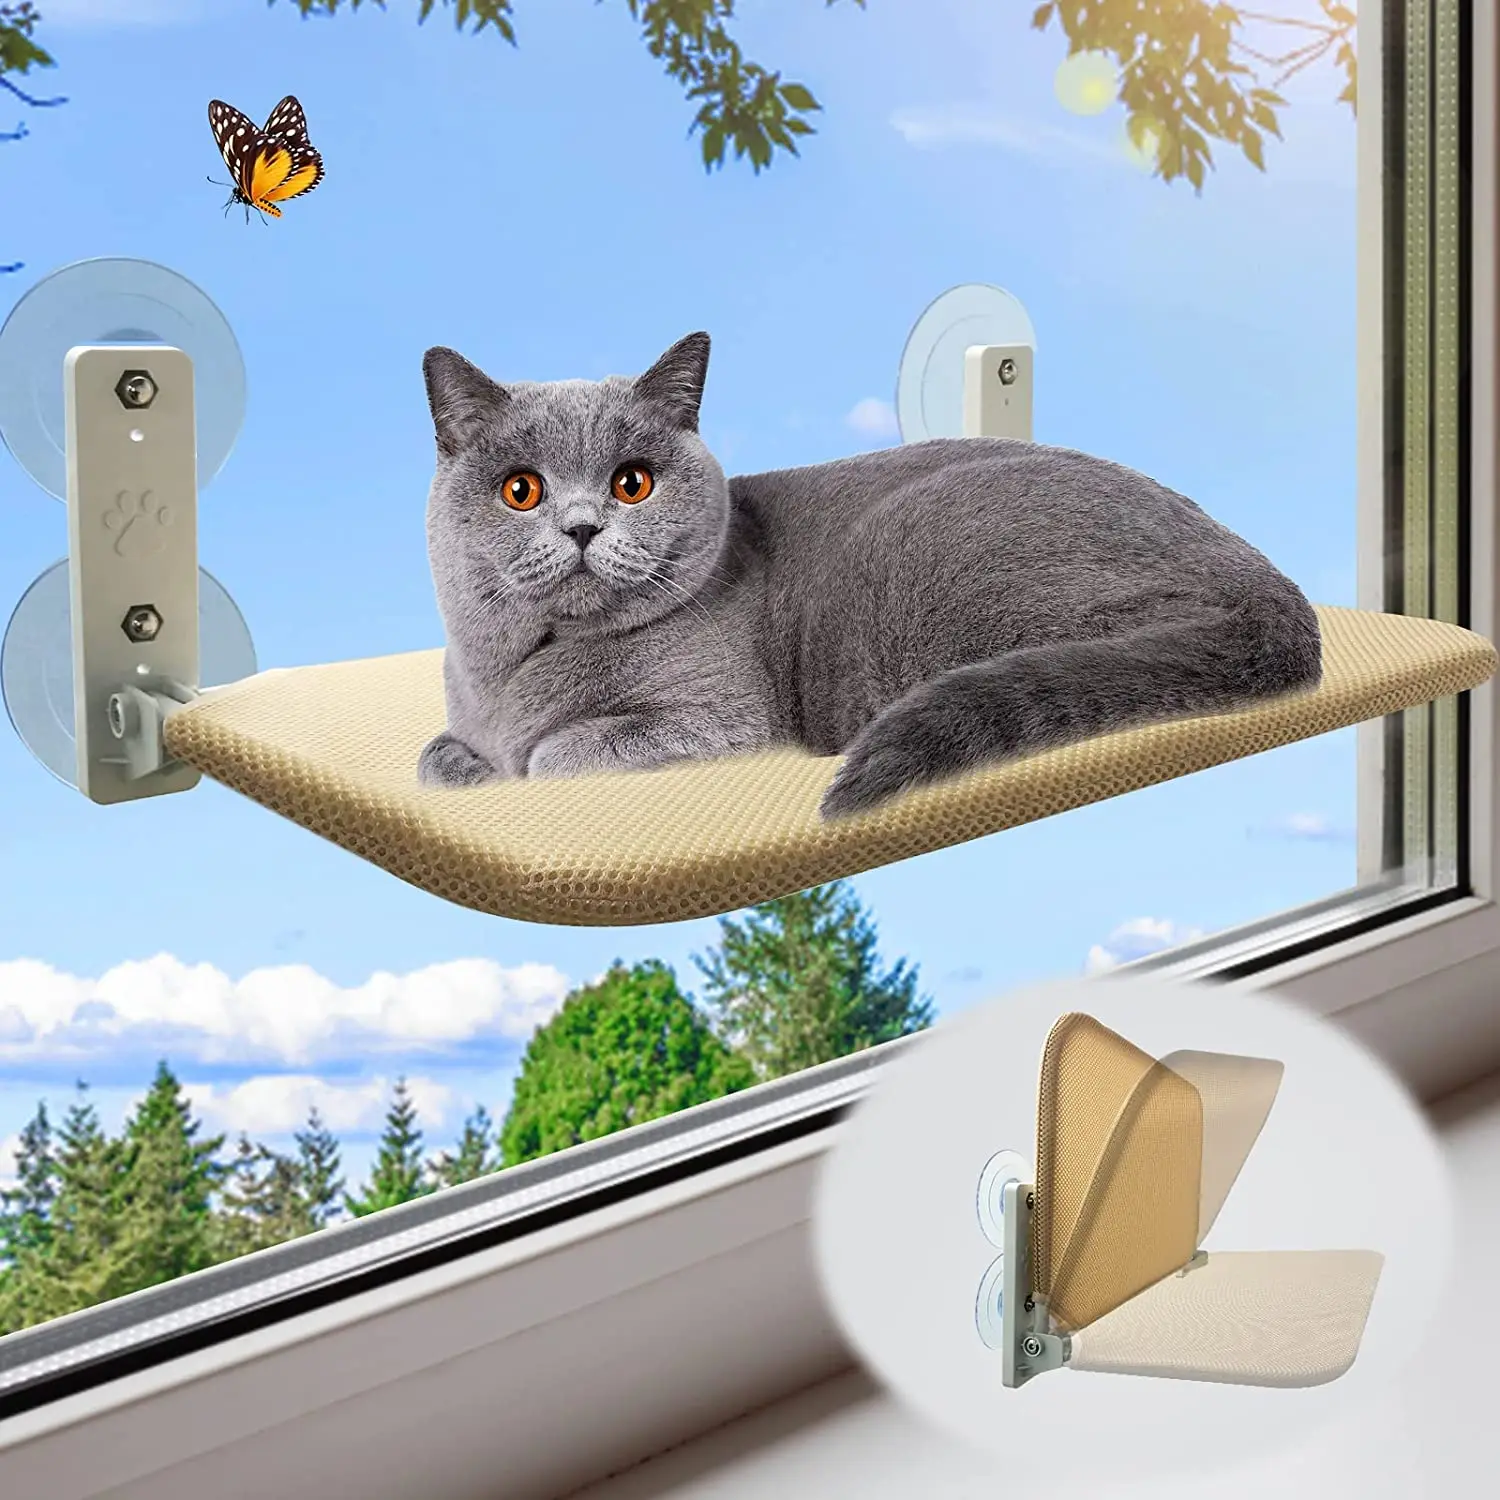 

Strong With Indoor Window For Cups 4 Windowsill Cats Window Suction Cordless Beds Cat Inside Cat Foldable Hammock Cat Perch Seat